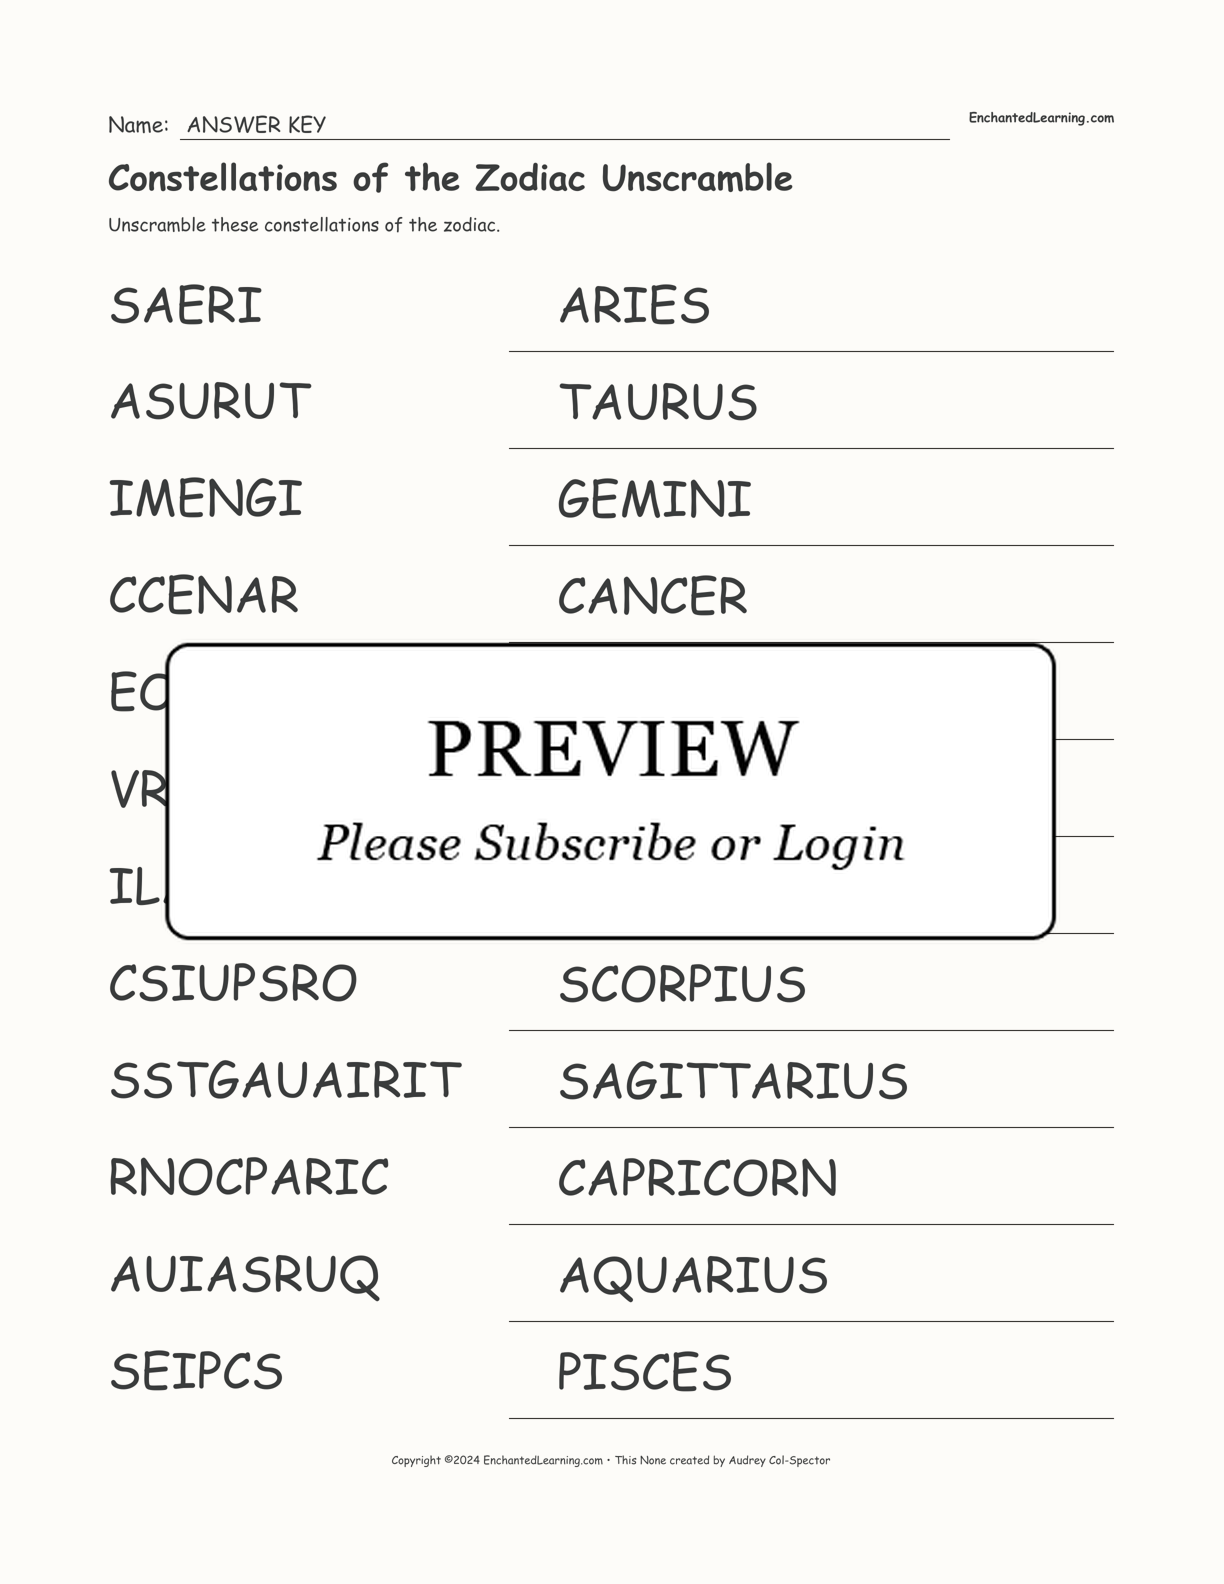 Constellations of the Zodiac Unscramble interactive worksheet page 2